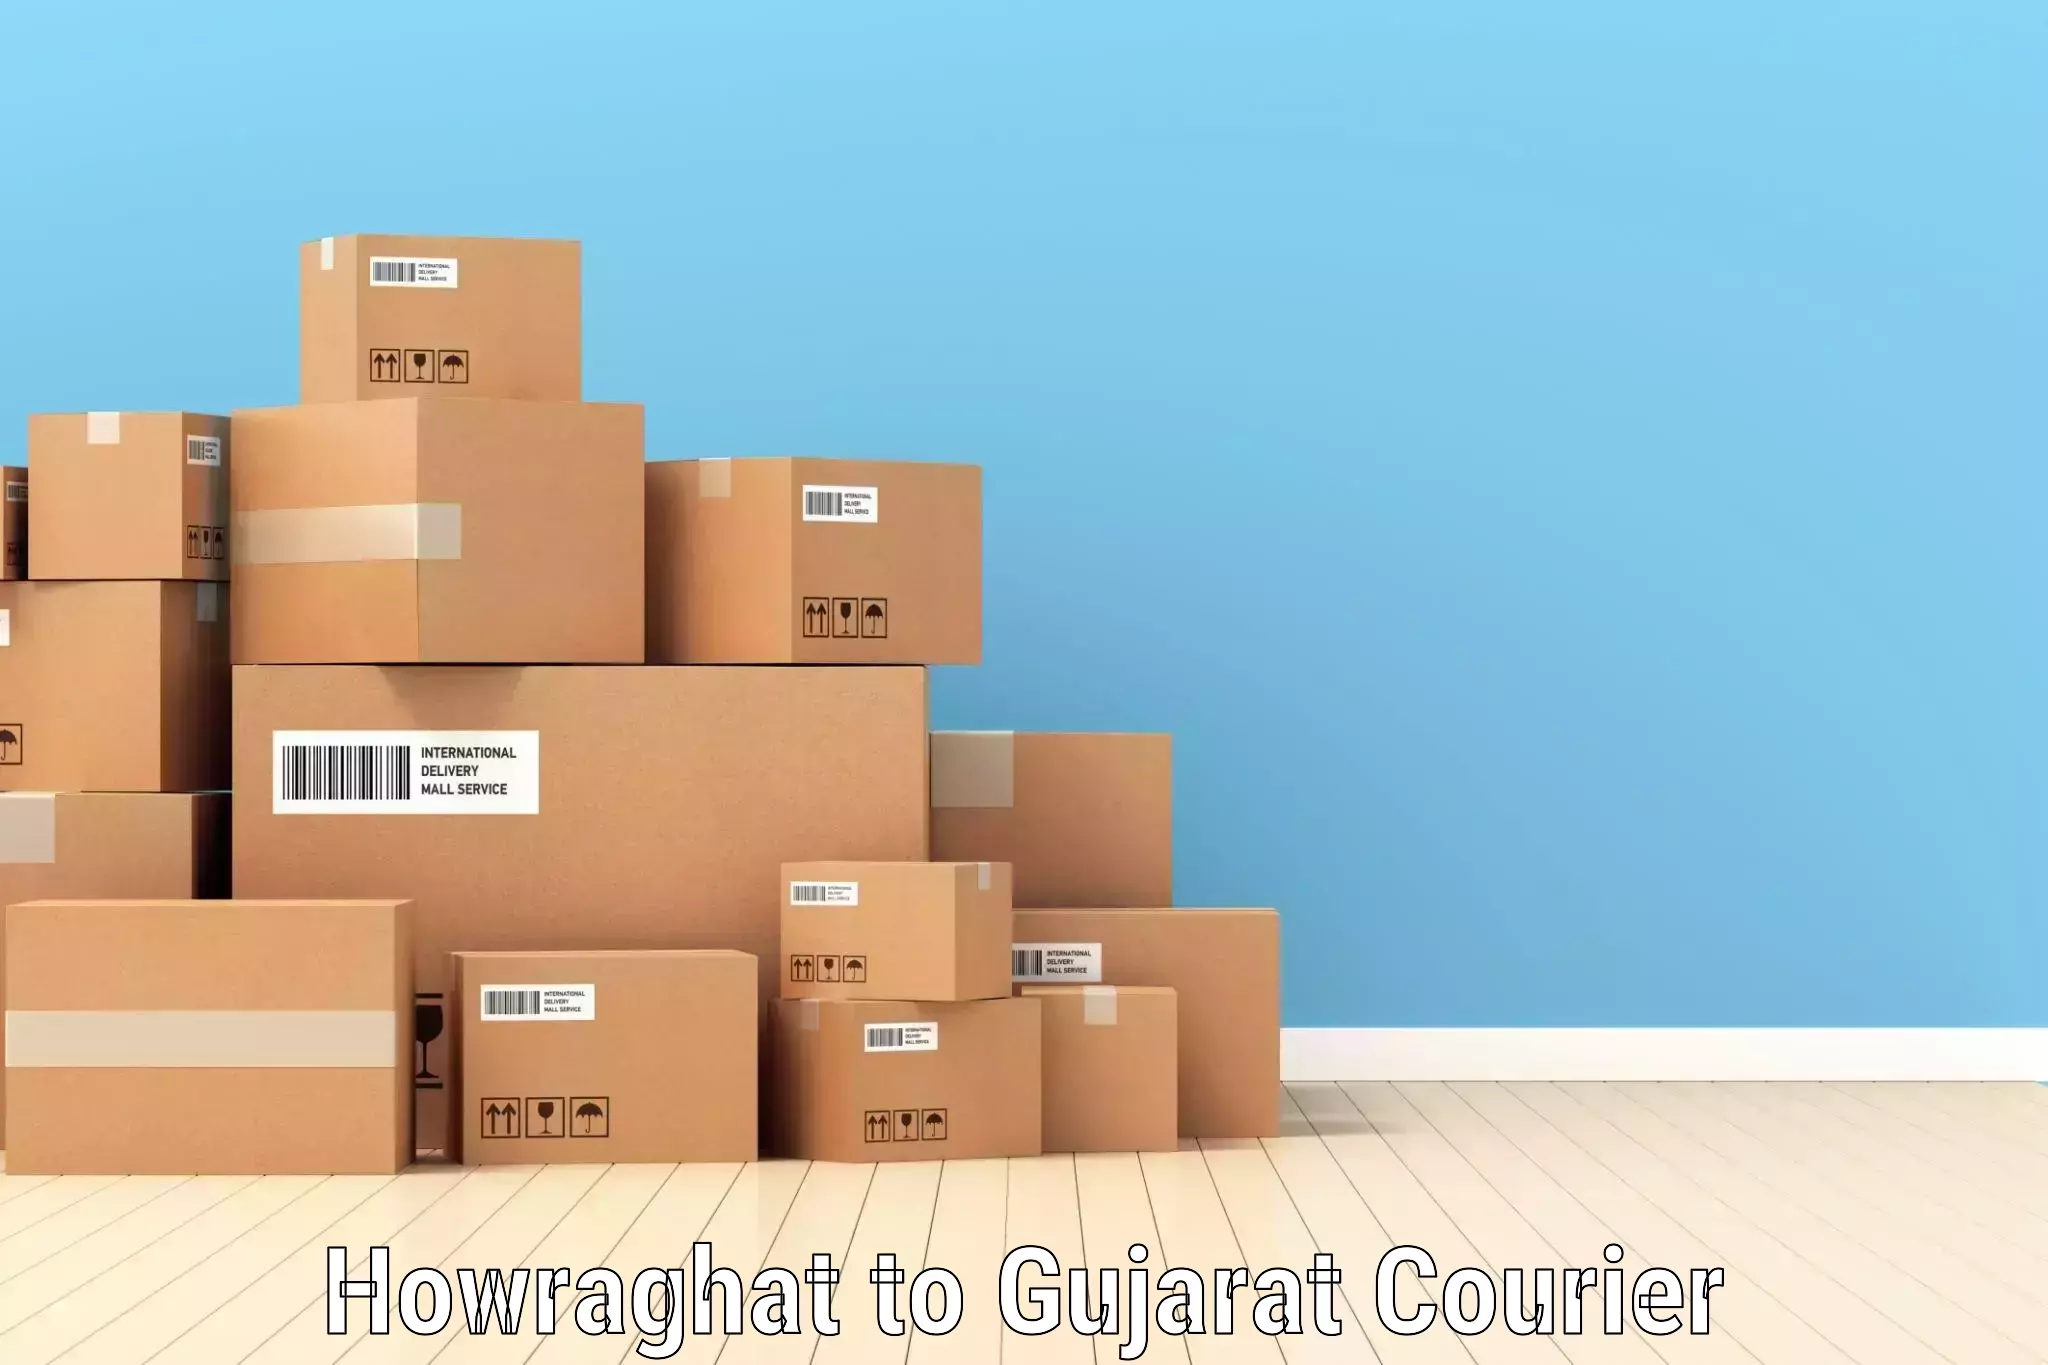 Reliable courier service Howraghat to Godhra